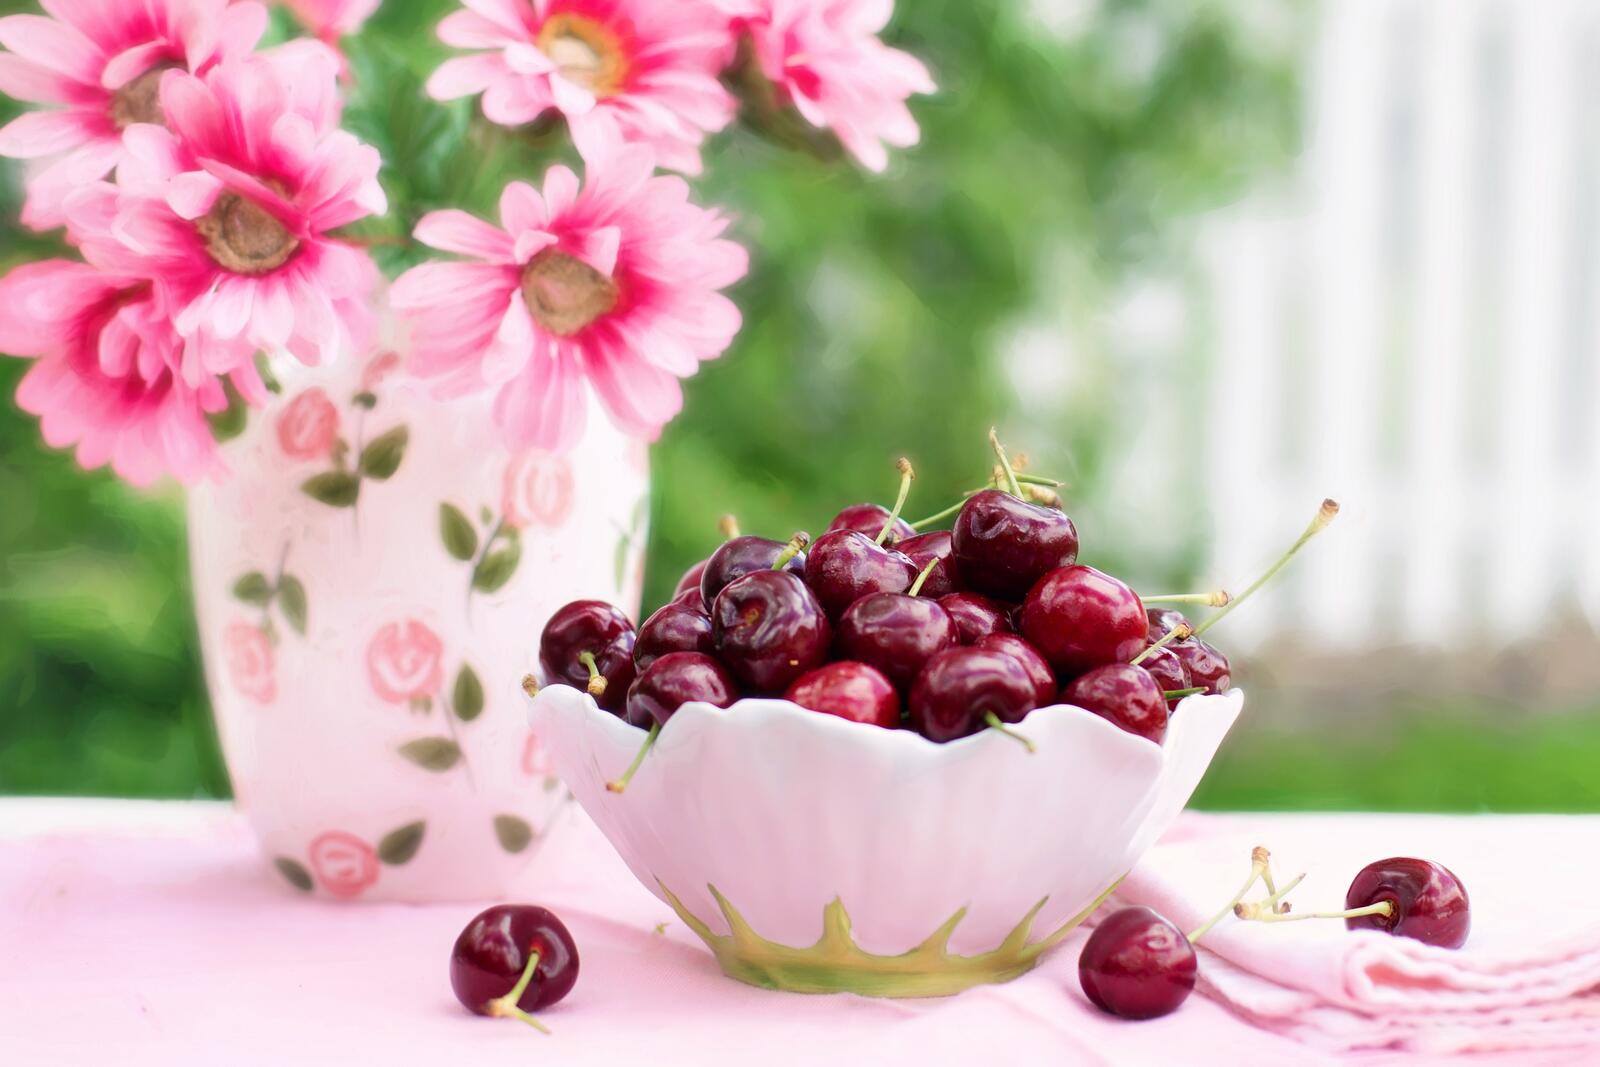 Free photo A plate of cherries on a table with a vase of pink flowers